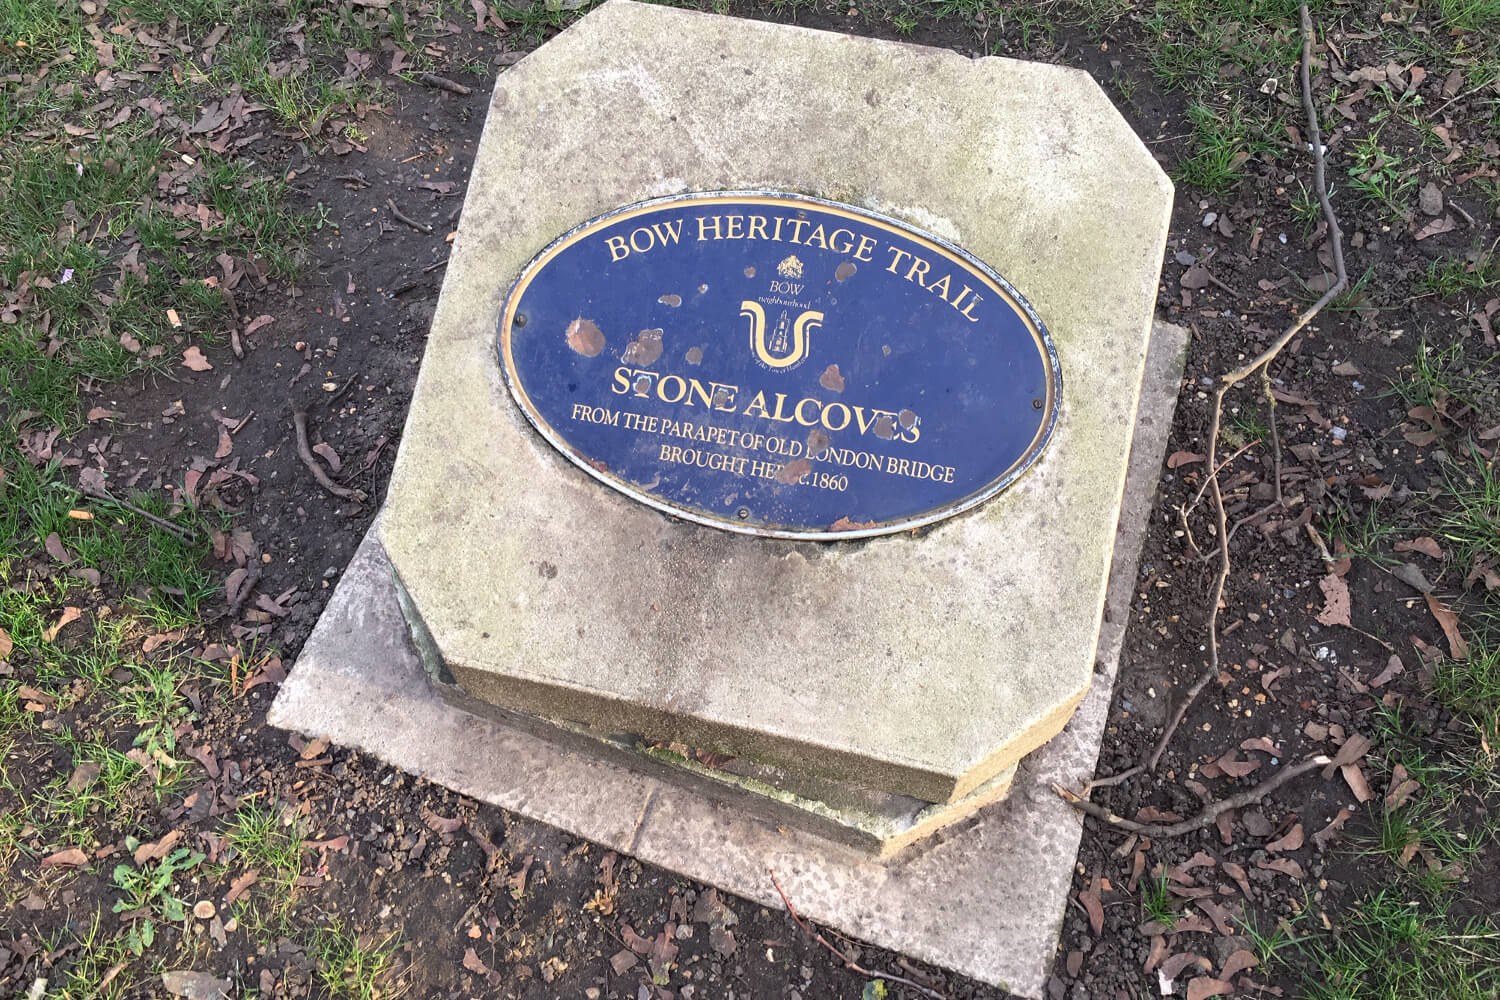 Plaque for the stone alcoves of Victoria Park, part of the Bow Heritage Trail